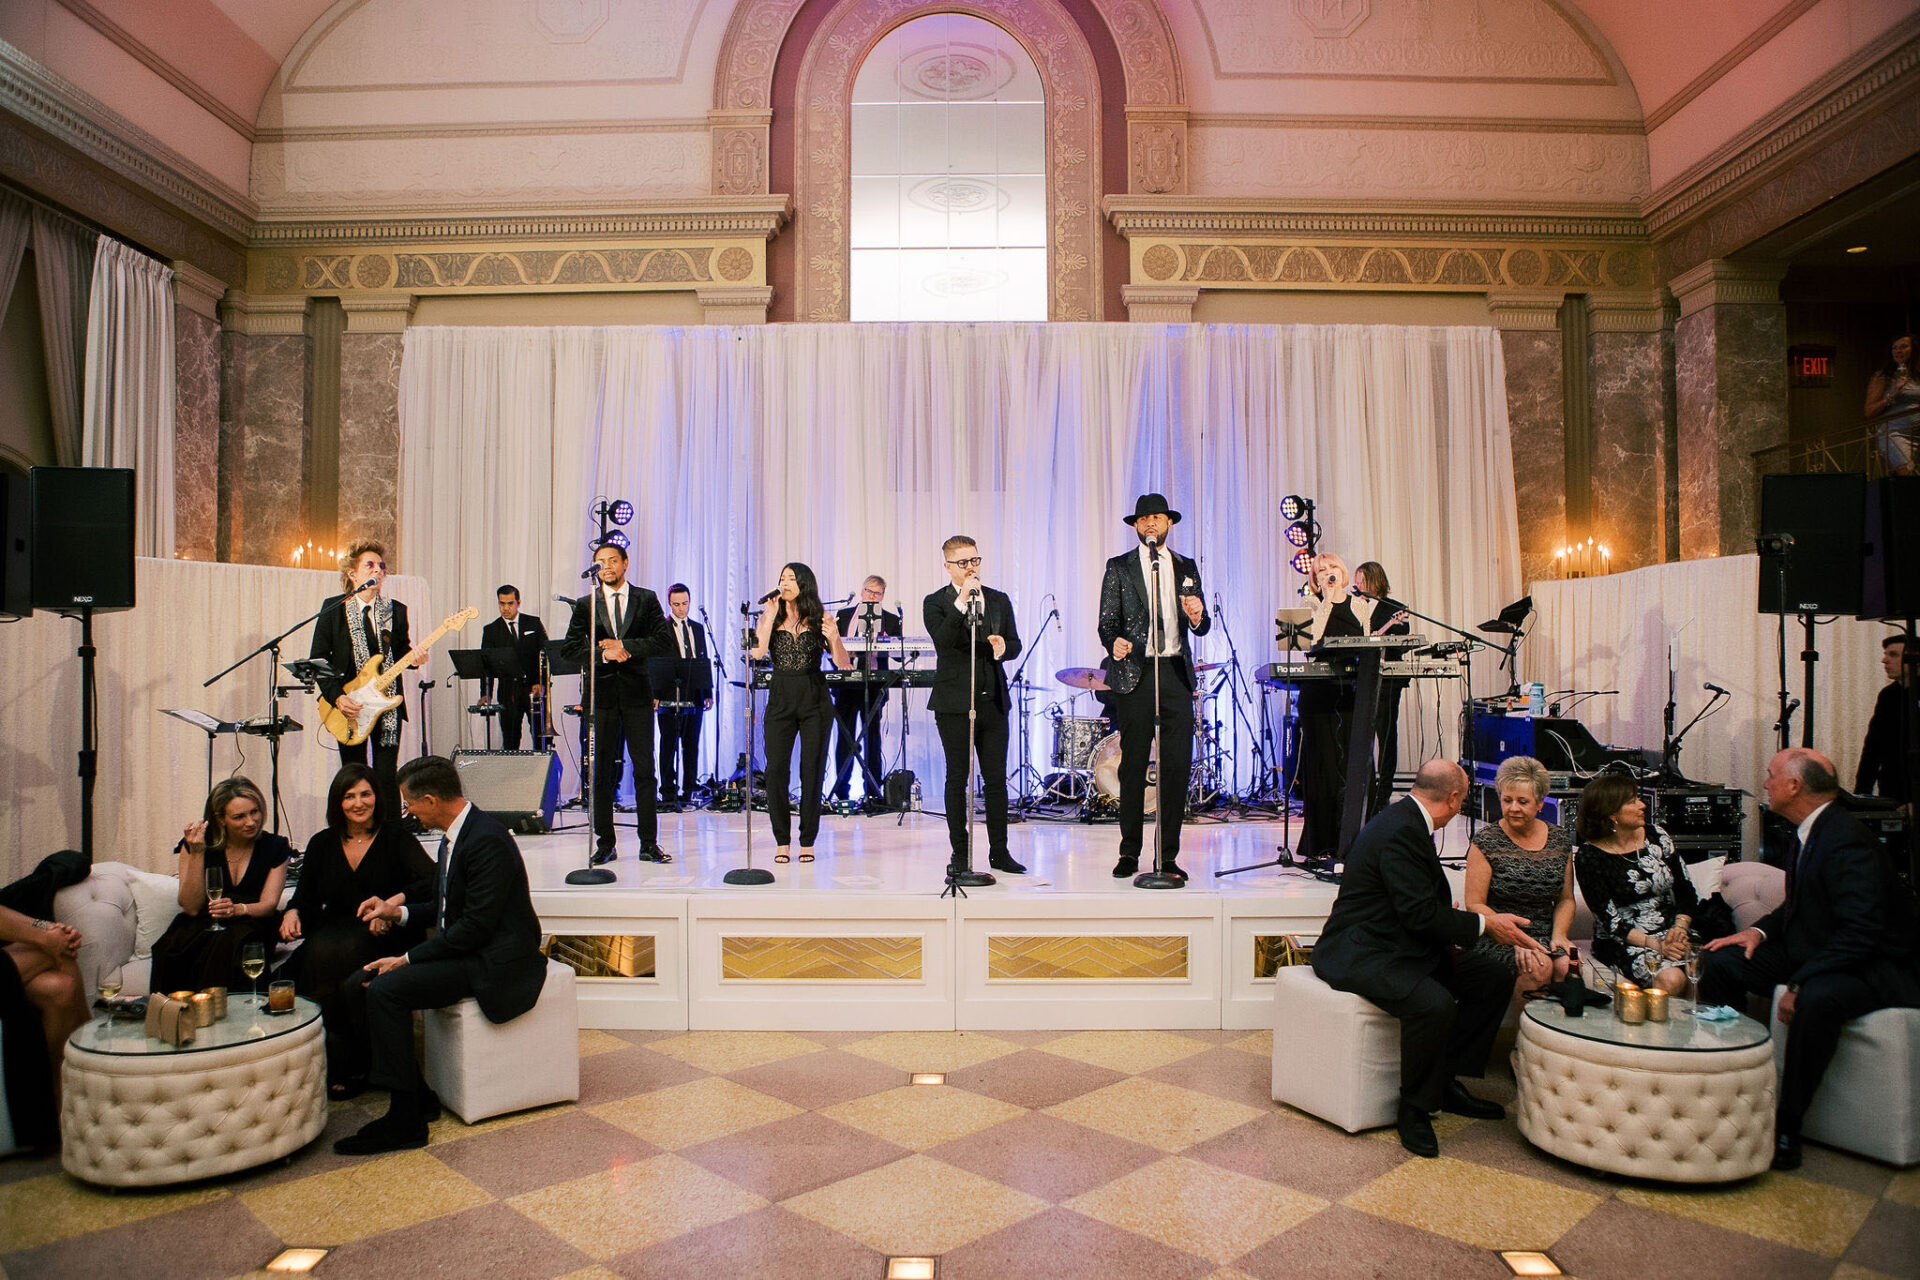 Wedding band playing in the front of an elegant, marble ballroom